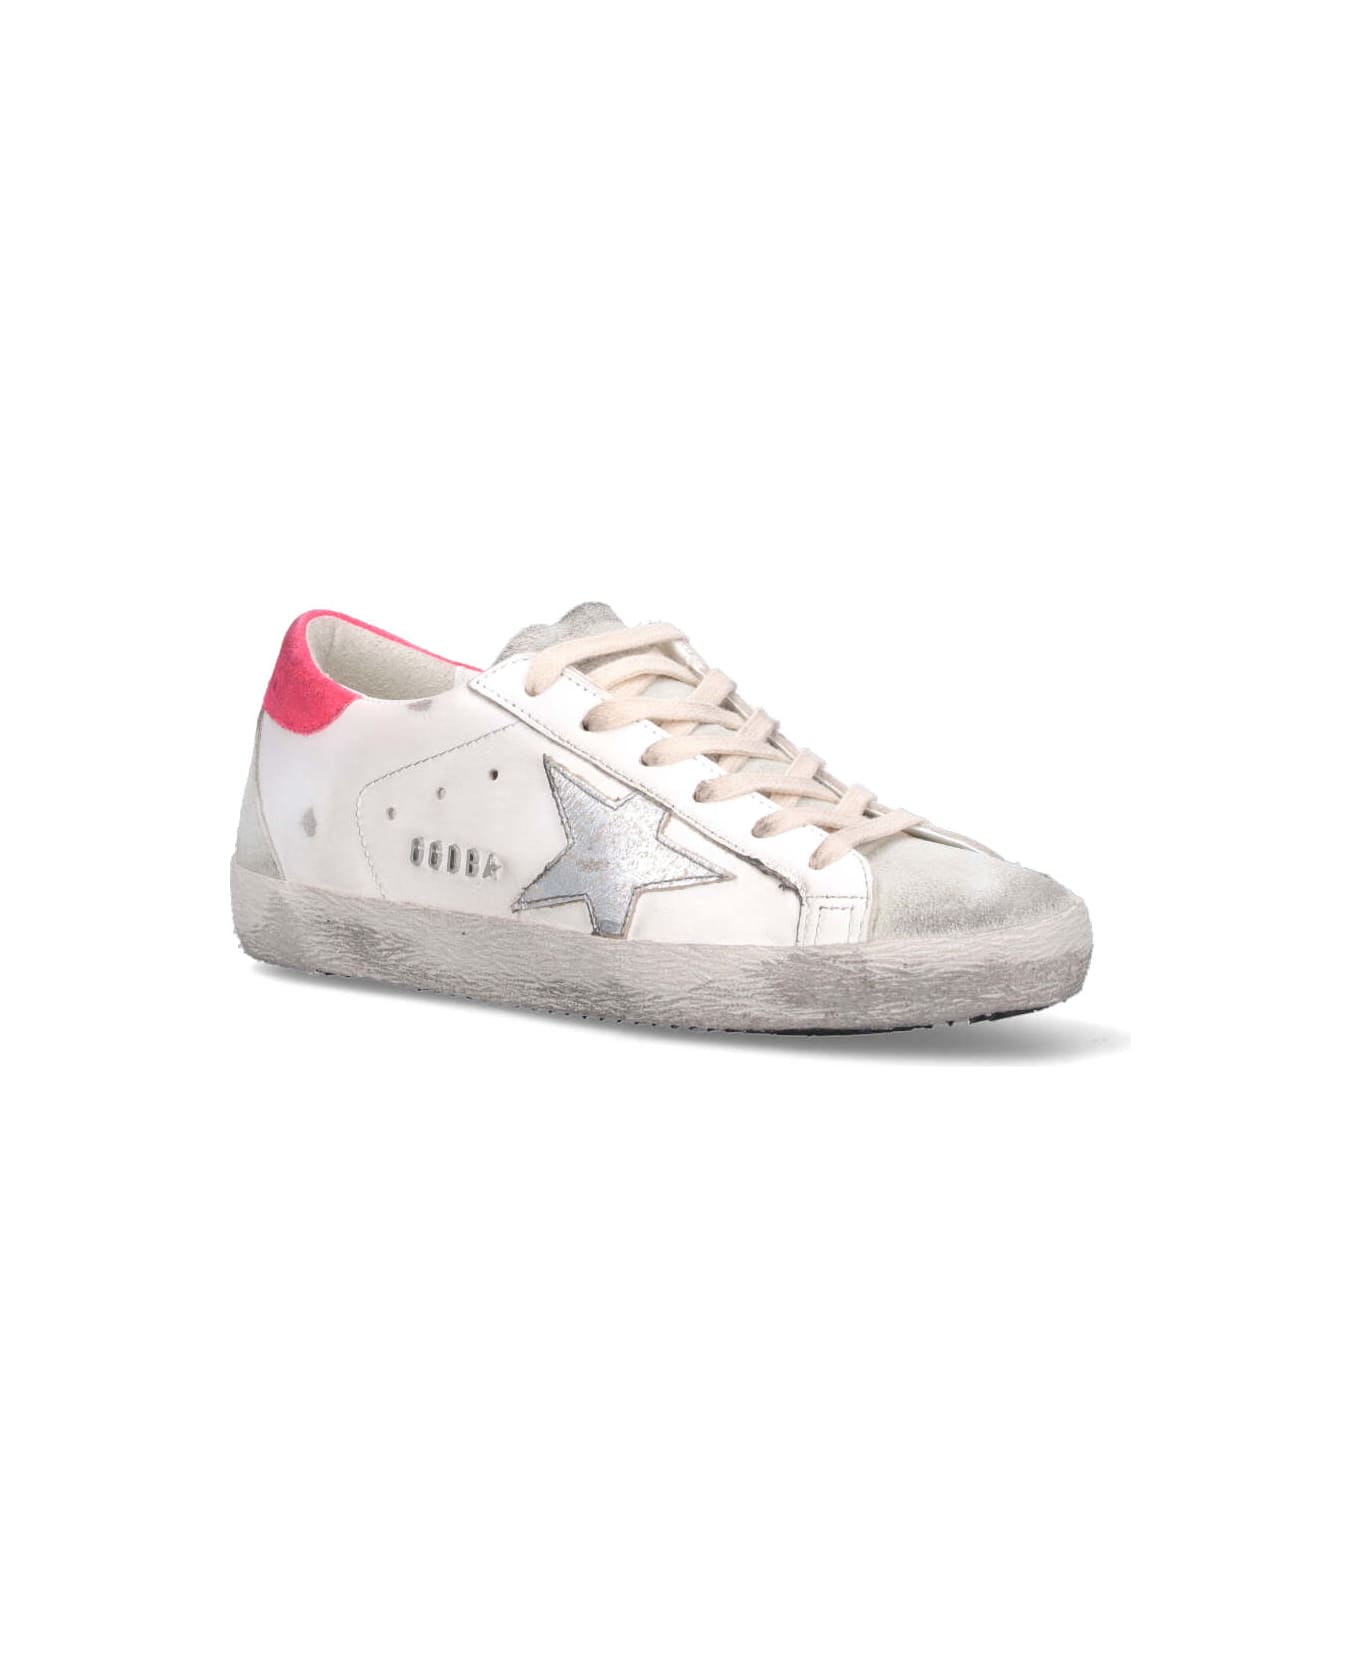 Golden Goose Superstar Classic Sneakers - WHITE/ICE